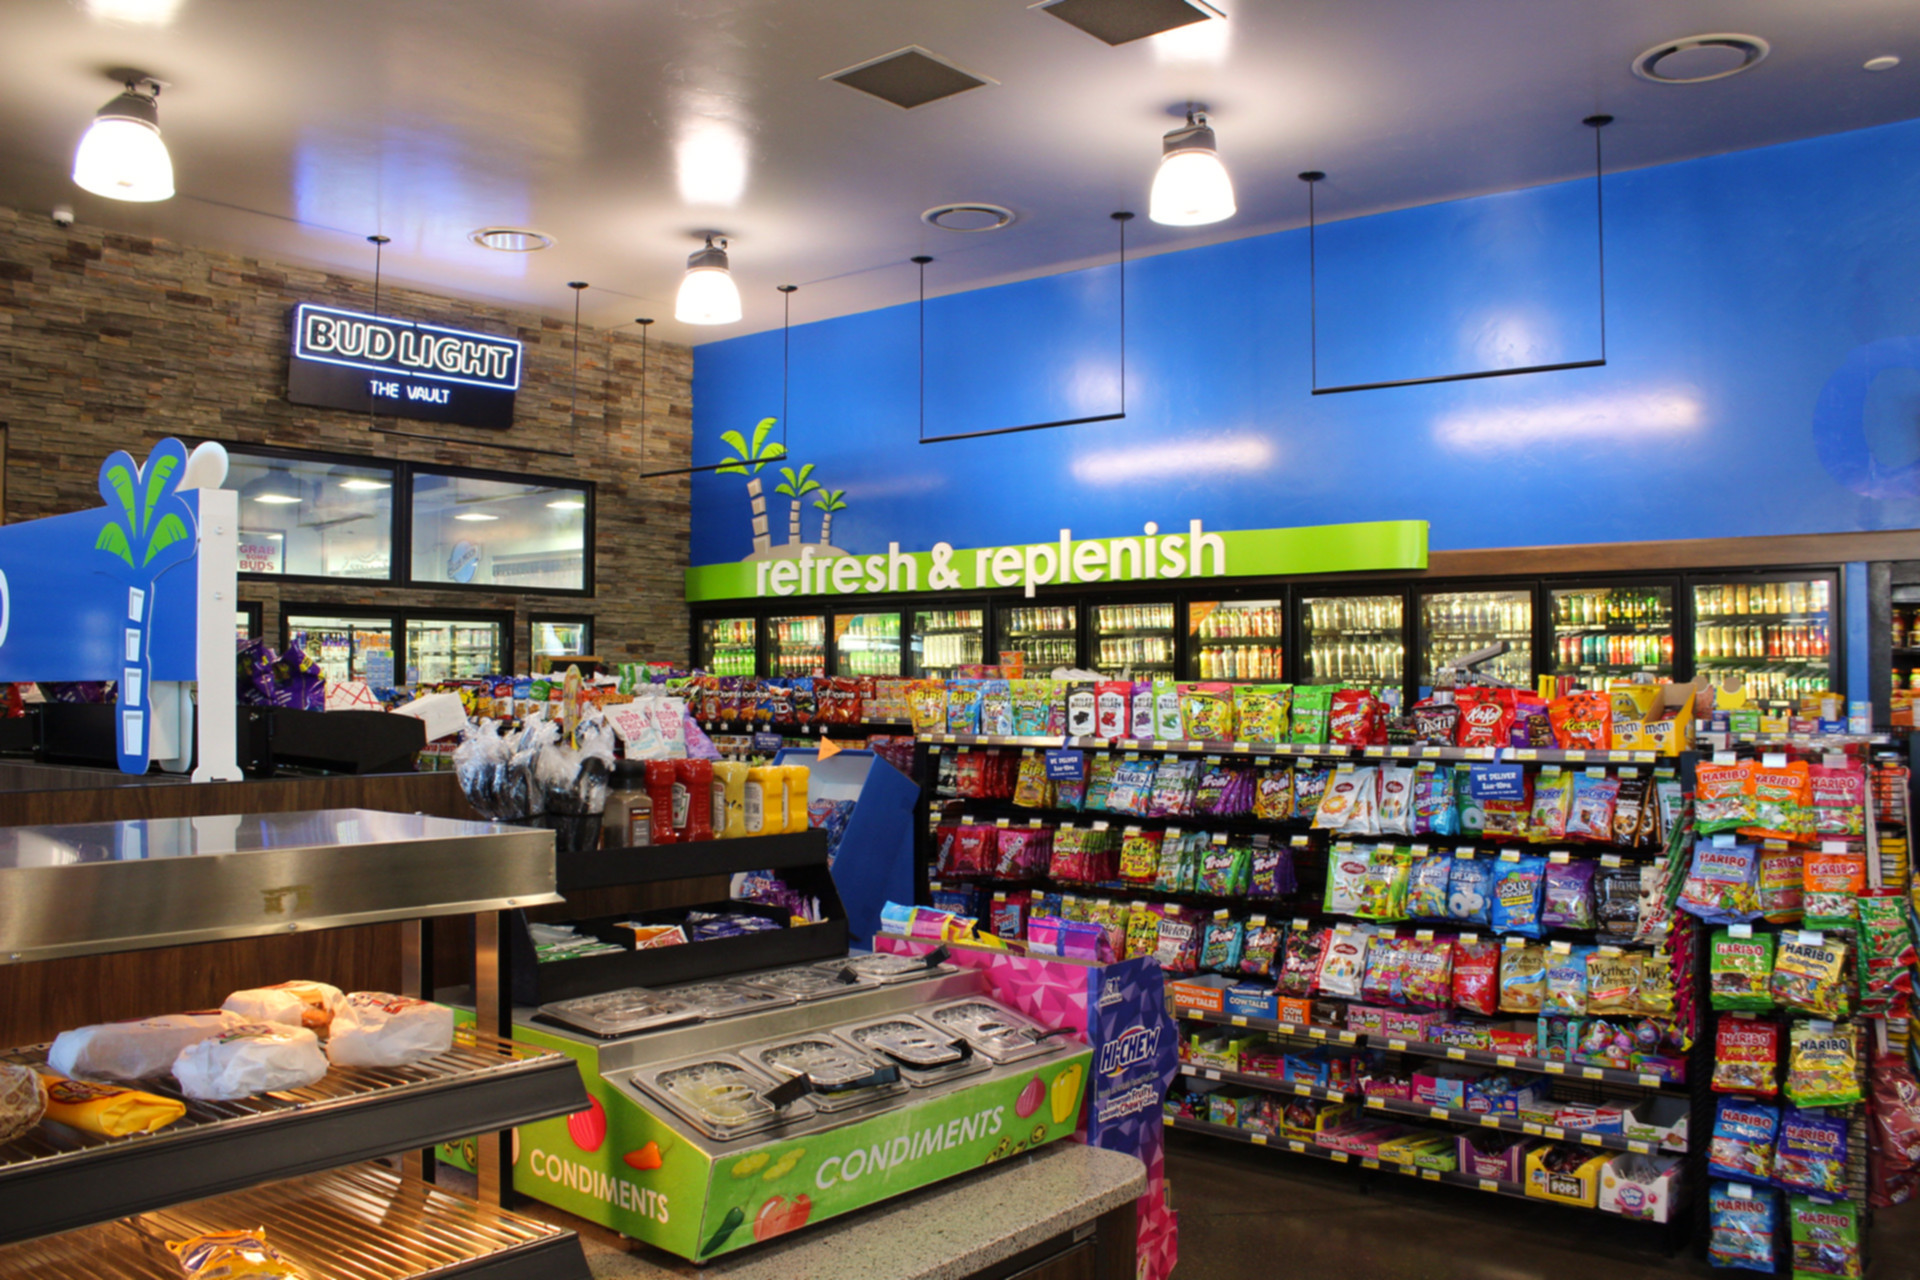 Inside Oasis Stop N Go convenience store. Snacks and Drinks